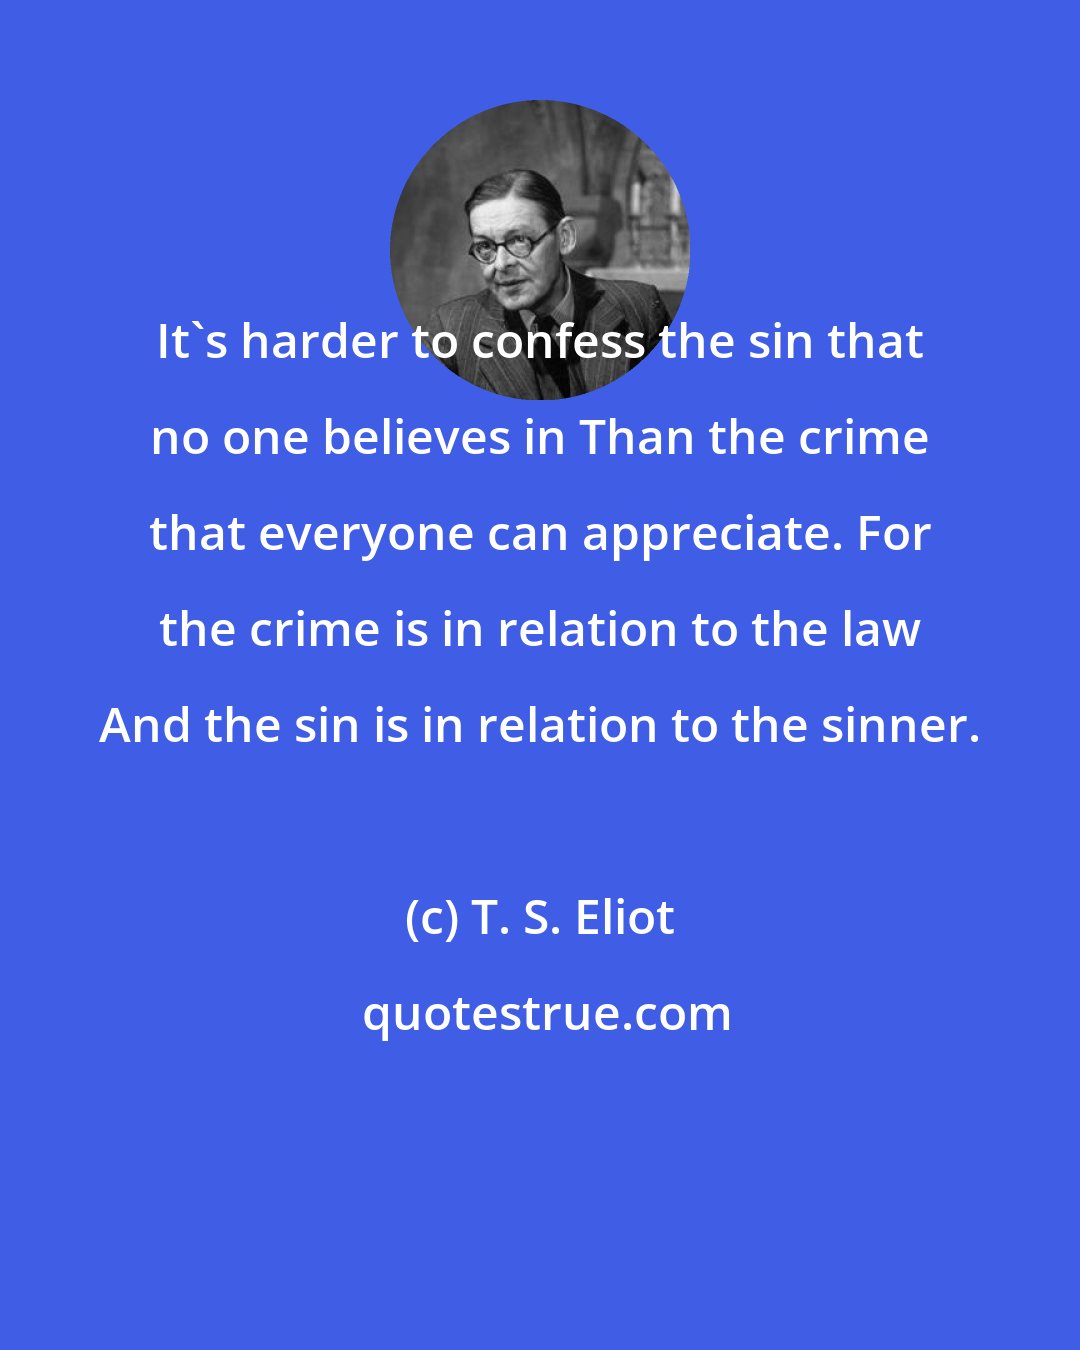 T. S. Eliot: It's harder to confess the sin that no one believes in Than the crime that everyone can appreciate. For the crime is in relation to the law And the sin is in relation to the sinner.